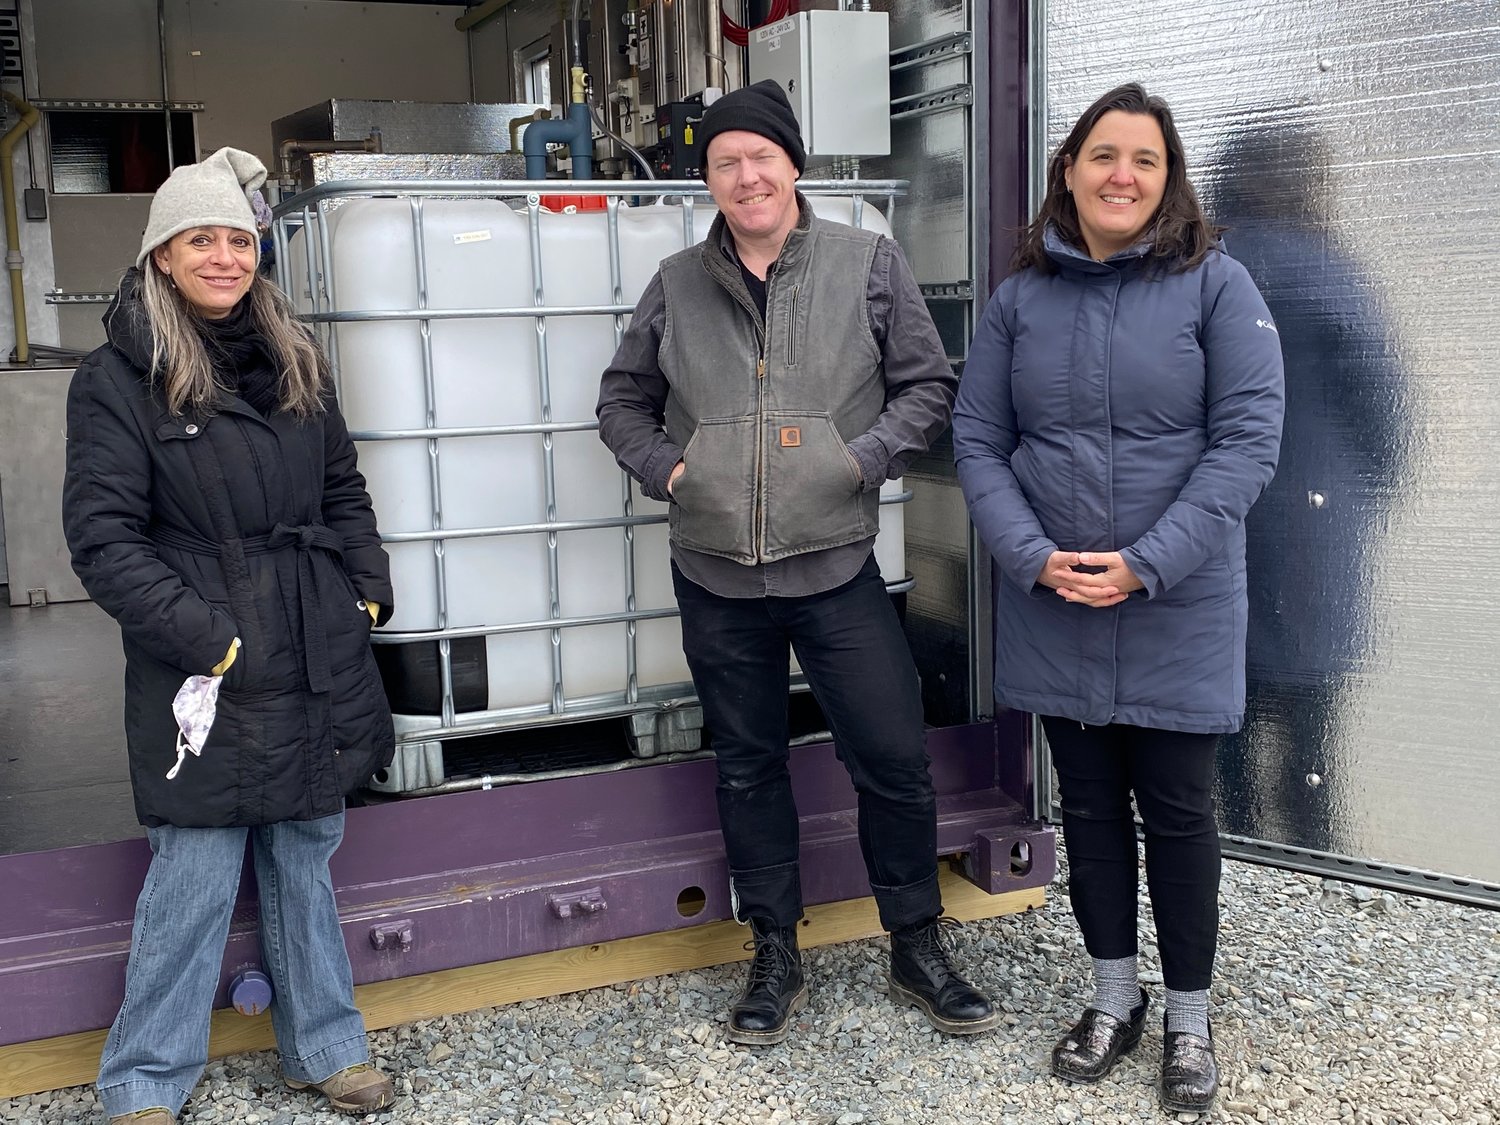 Tusten Energy Committee (TEC) Chair Brandi Merolla, left, member Scott Porter, and Jennifer Porter stand in front of the container which will eventually be filled with probiotic plant food. Jennifer, a consultant for solid waste management, learned of the digester at a trade show in 2018. When the NY Department of Conservation called for foodwaste projects in 2018, Jennifer worked with the TEC, to apply and receive full funding for the project. Good Find Farm, who assisted with the grant application is interested in using the plant food on their farm in Damascus, PA.